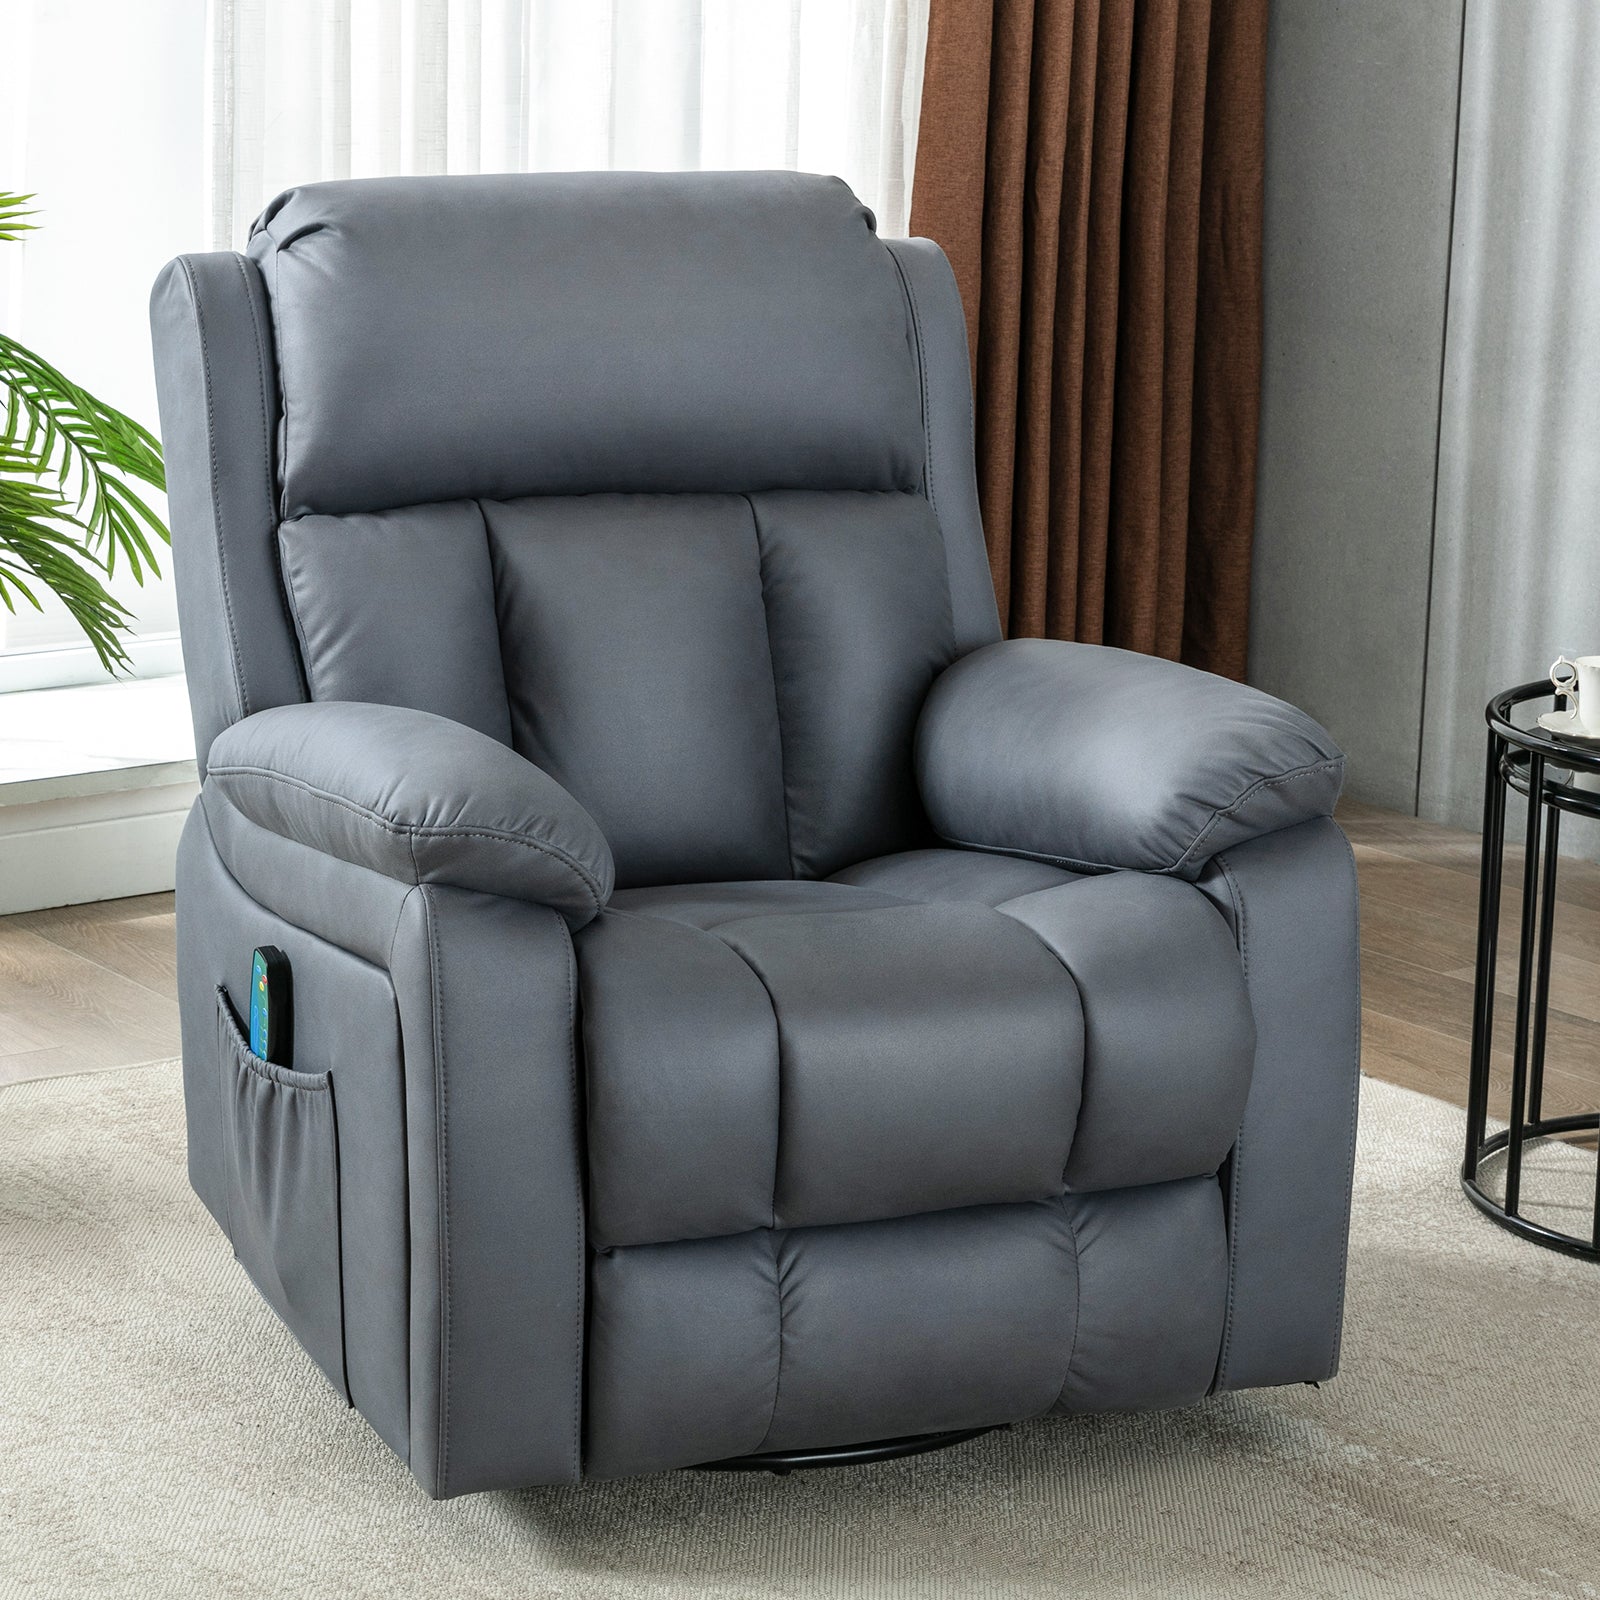 Massage Recliner Chair 360¡ã Swivel Rocker Recliner Lounge Chair, Leather Reclining Sofa with Side Pockets, Blue